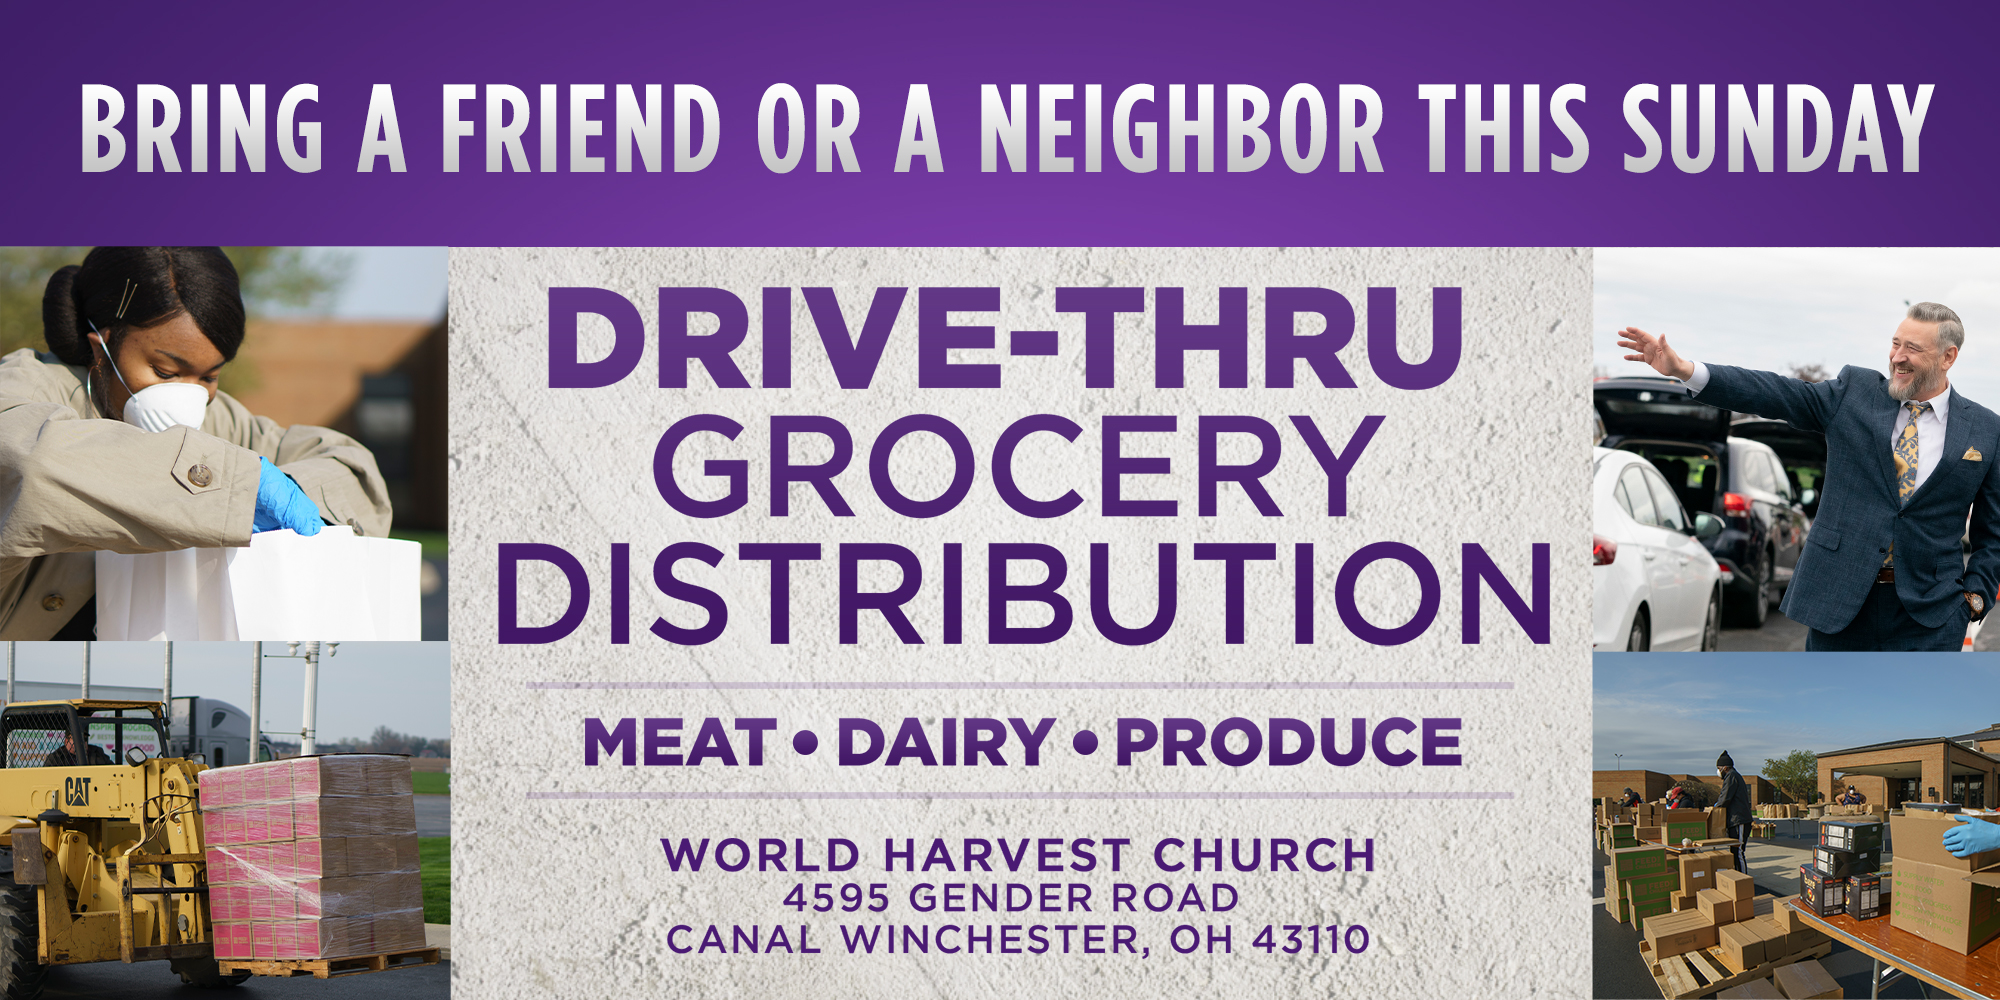 Bring a friend or a neighbor this sunday Drive-Thru Grocery Distribution Meat, Dairy, Produce. World Harvest Church